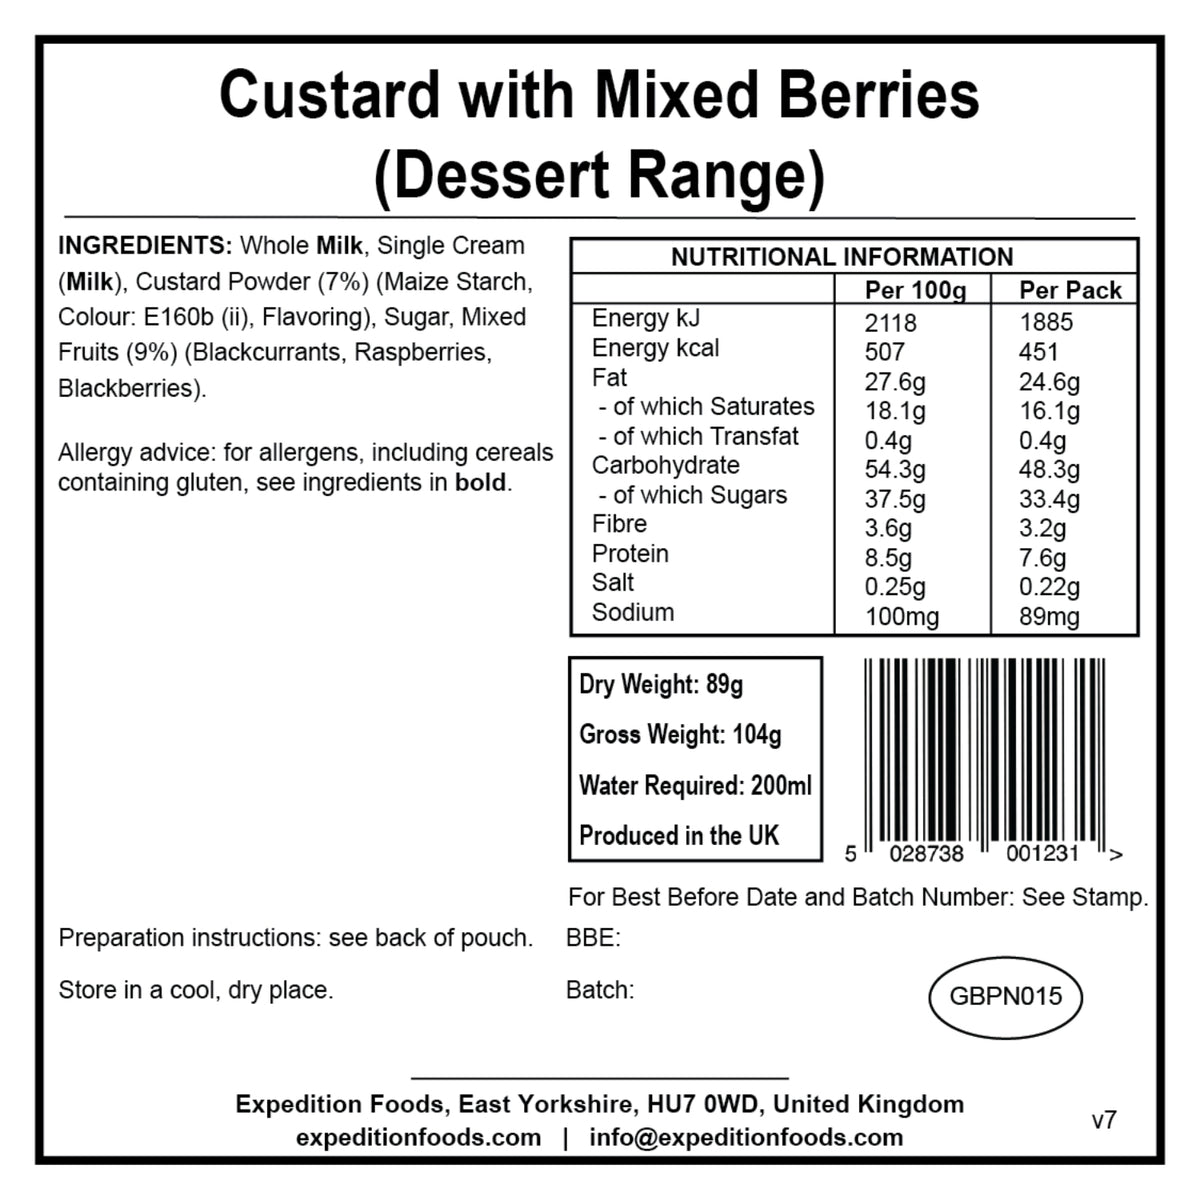 Expedition Foods Custard with Mixed Berries in packet